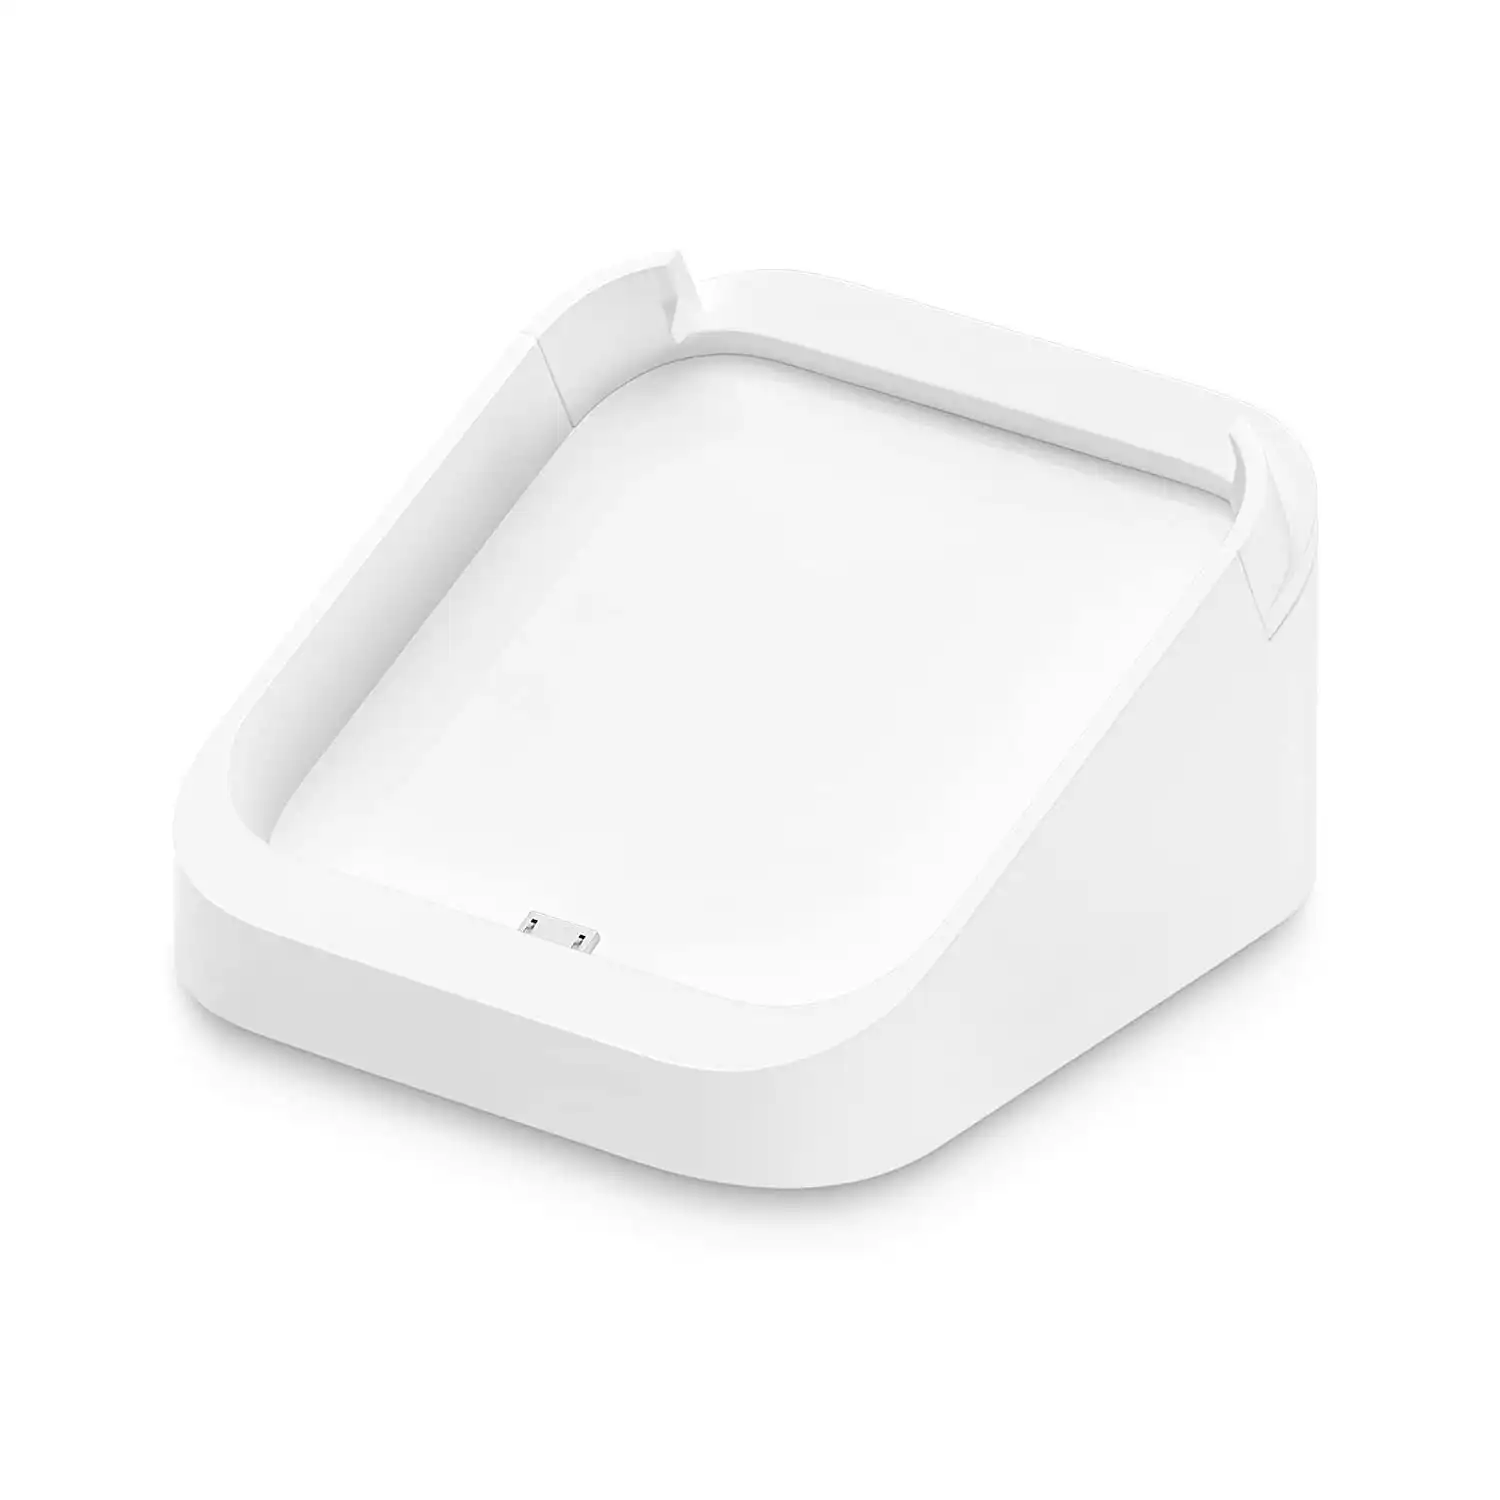 Square AU A-SKU-0264 Square Dock for Contactless Reader